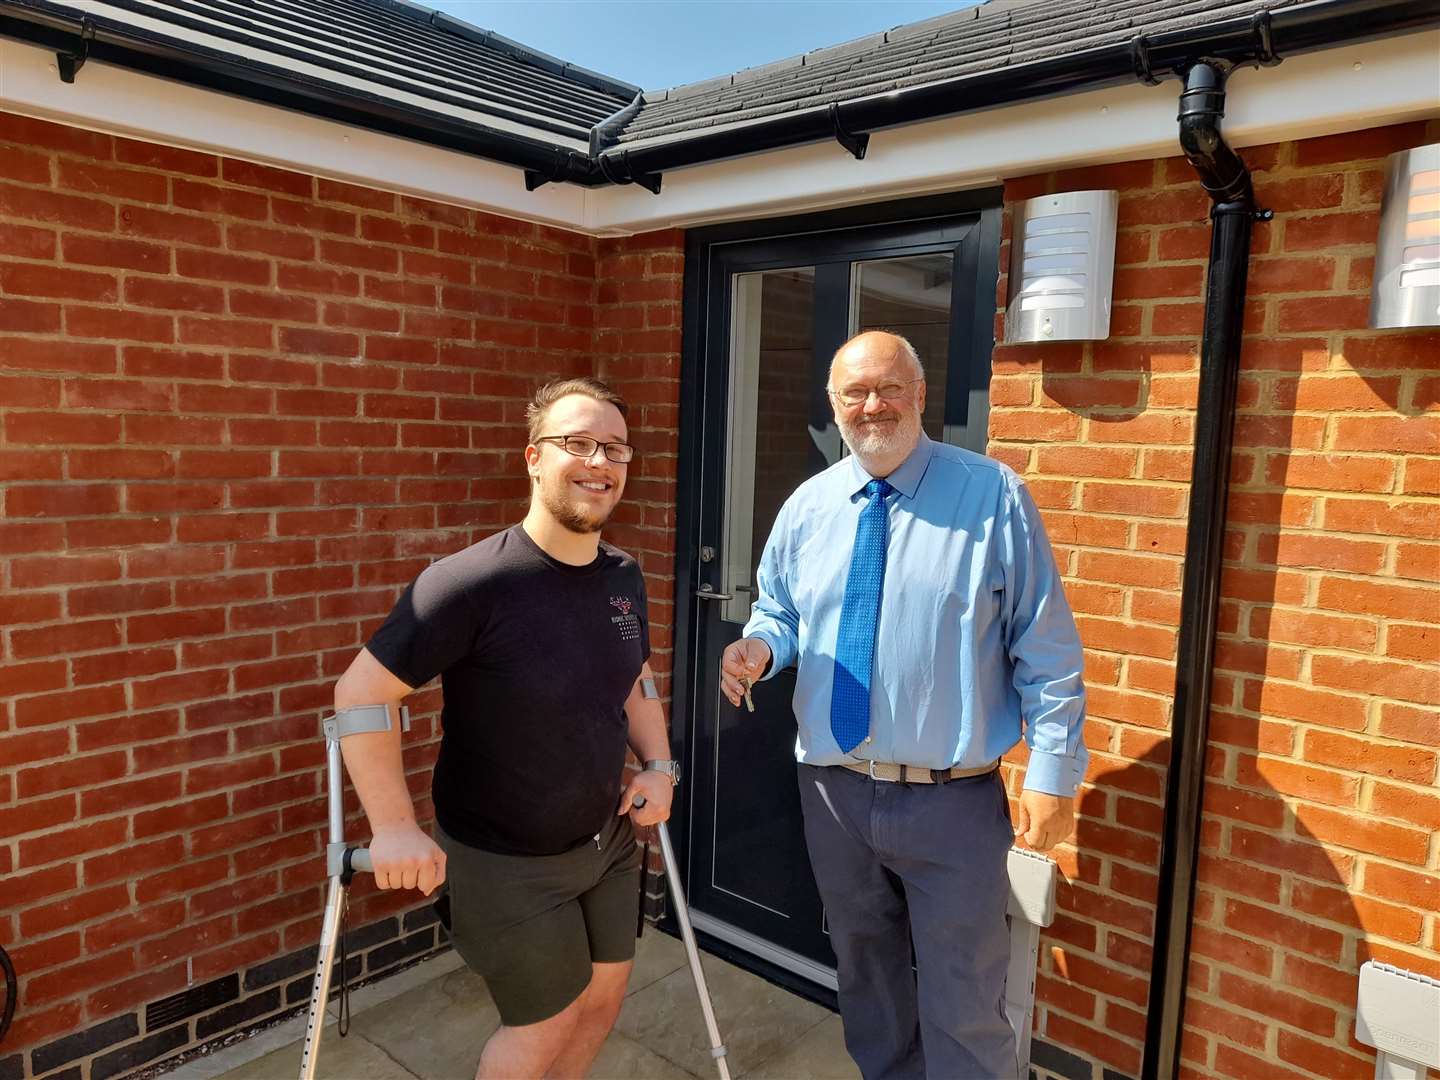 New tenant Connor Palmer with council leader Jeremy Kite at Dartford council's new adapted homes for people with additional needs in Mead Crescent, Dartford. Picture: Dartford council